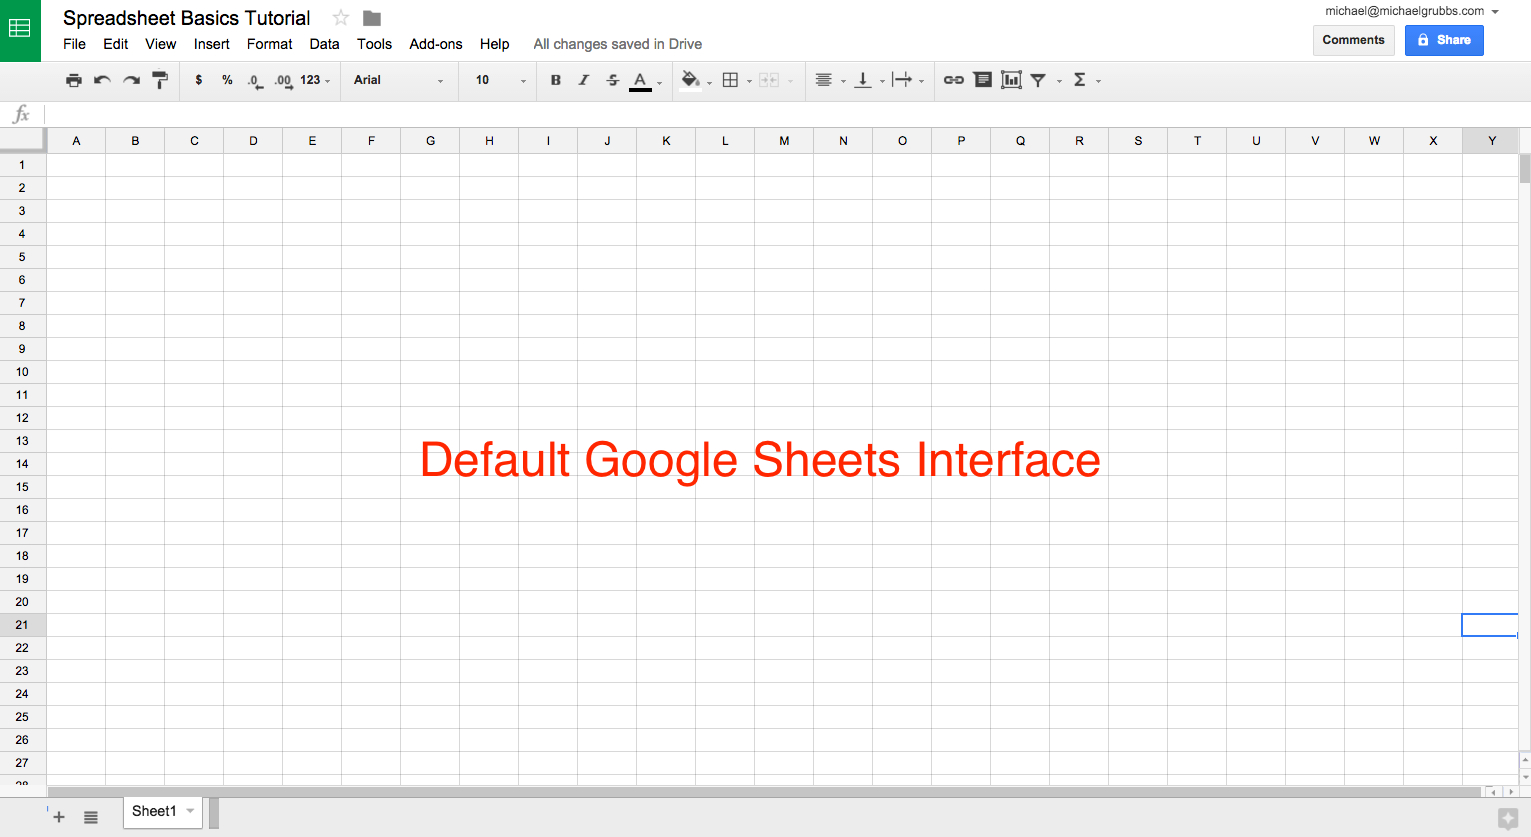 How To Create A Spreadsheet With Google Sheets 101: The Beginner's Guide To Online Spreadsheets  The